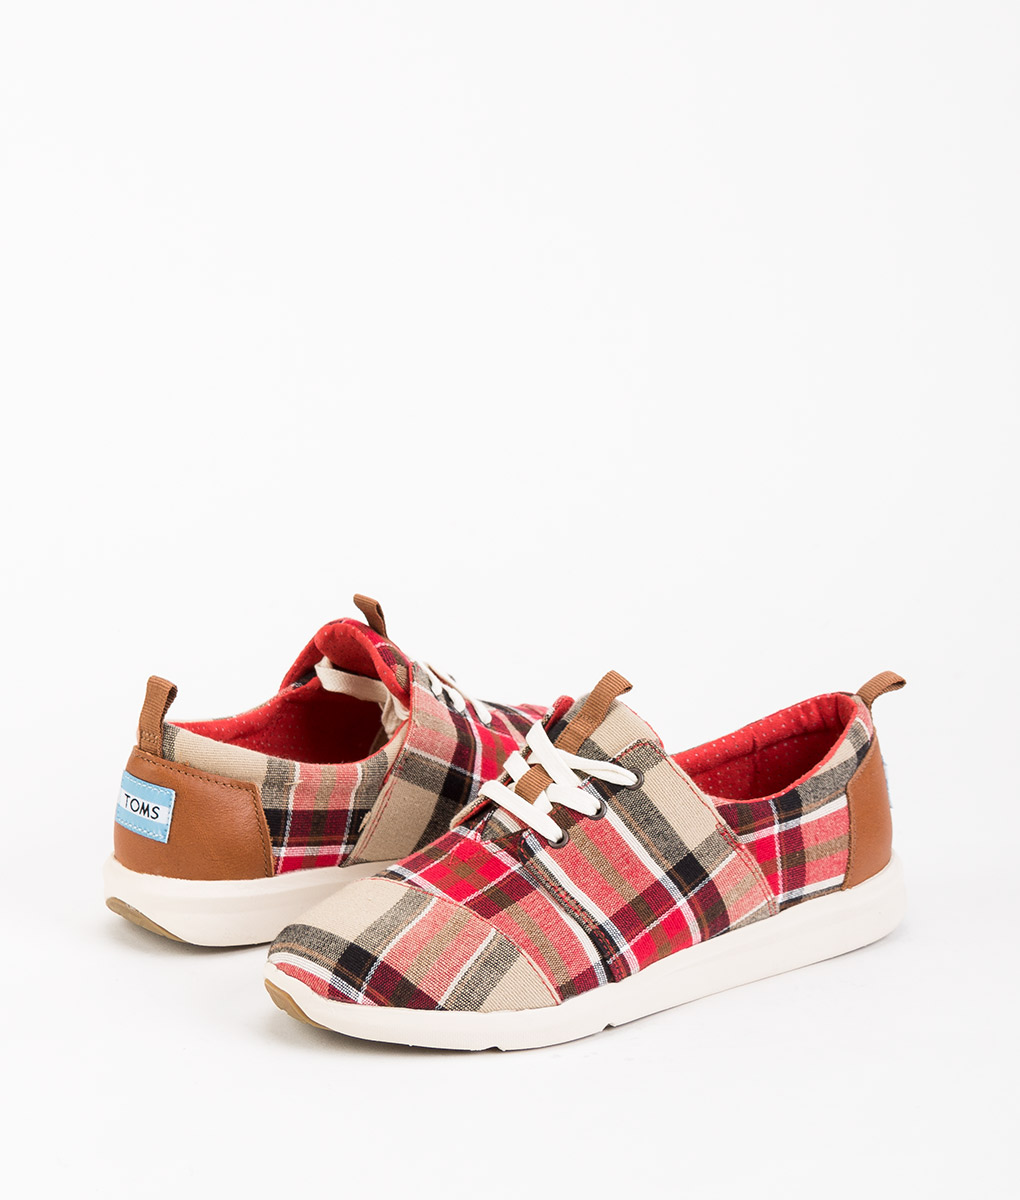 TOMS Women Sneakers 8895 DEL RAY, Red Warm Tan 89.99 1